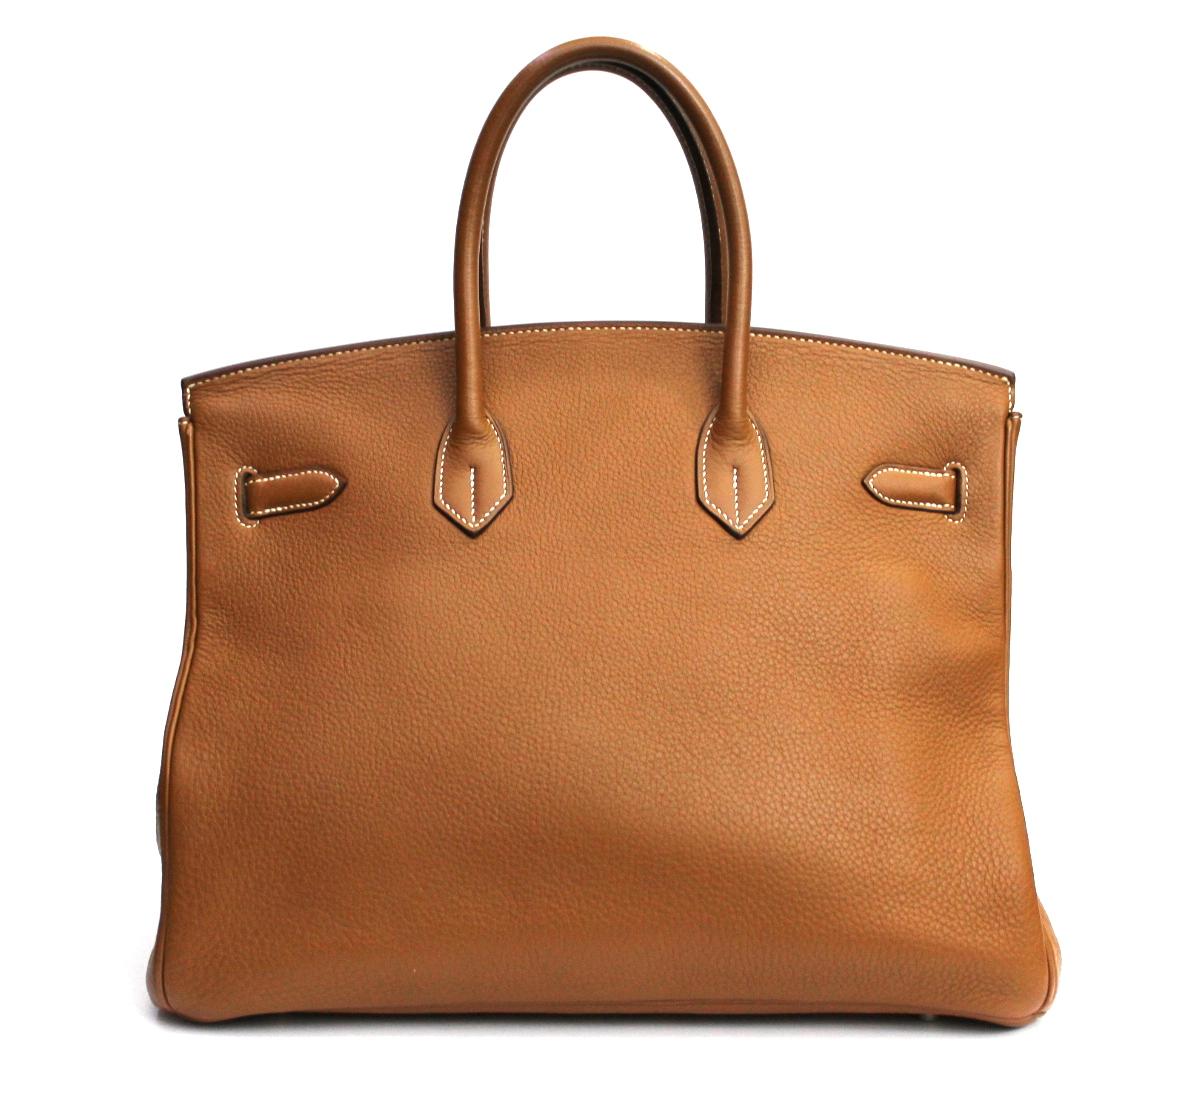 This Hermès Birkin 35cm is crafted from gold togo leather, a highly popular hide due to its ability to retain its shape and near-scratch resistance. Its deep, The gold exterior is offset with silver-toned palladium hardware. 35cm in width, the